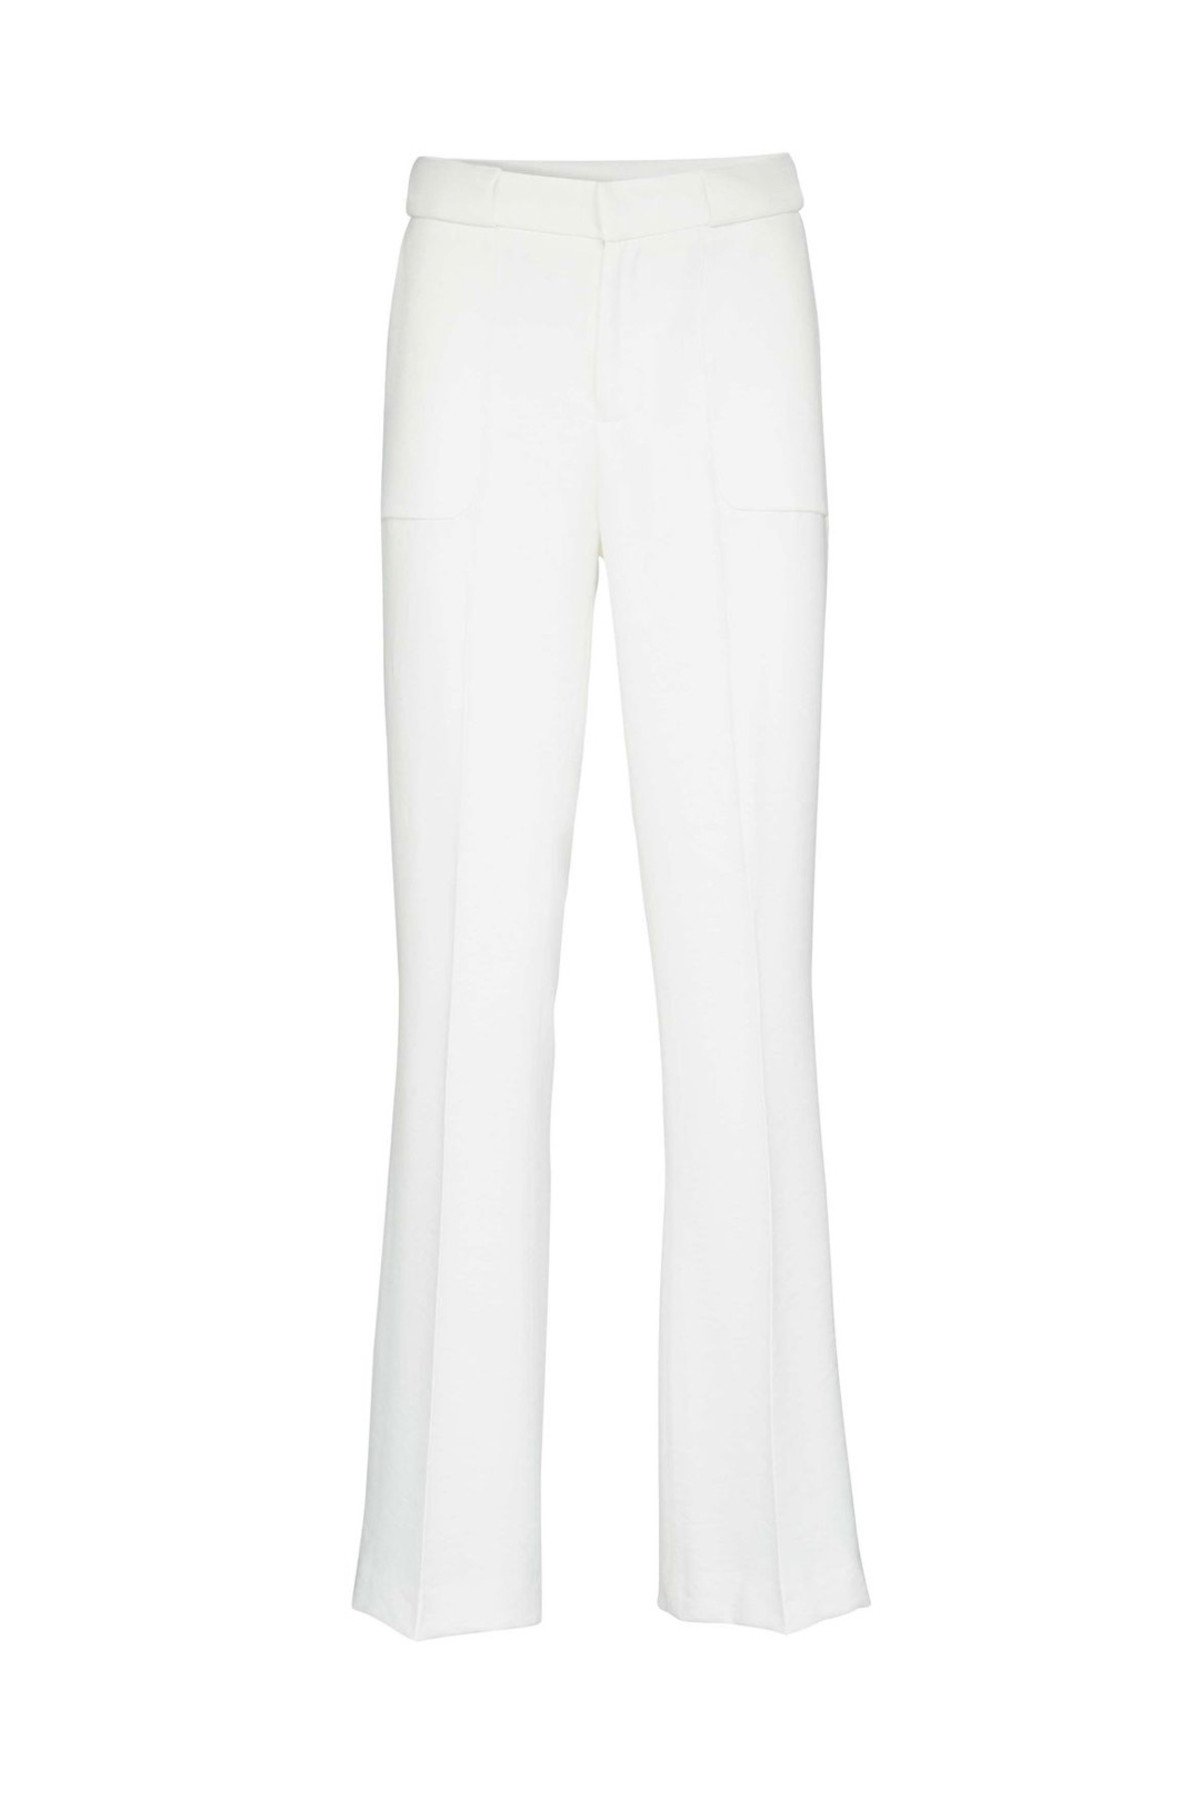 Tiger of Sweden Arvil Trousers in White — UFO No More